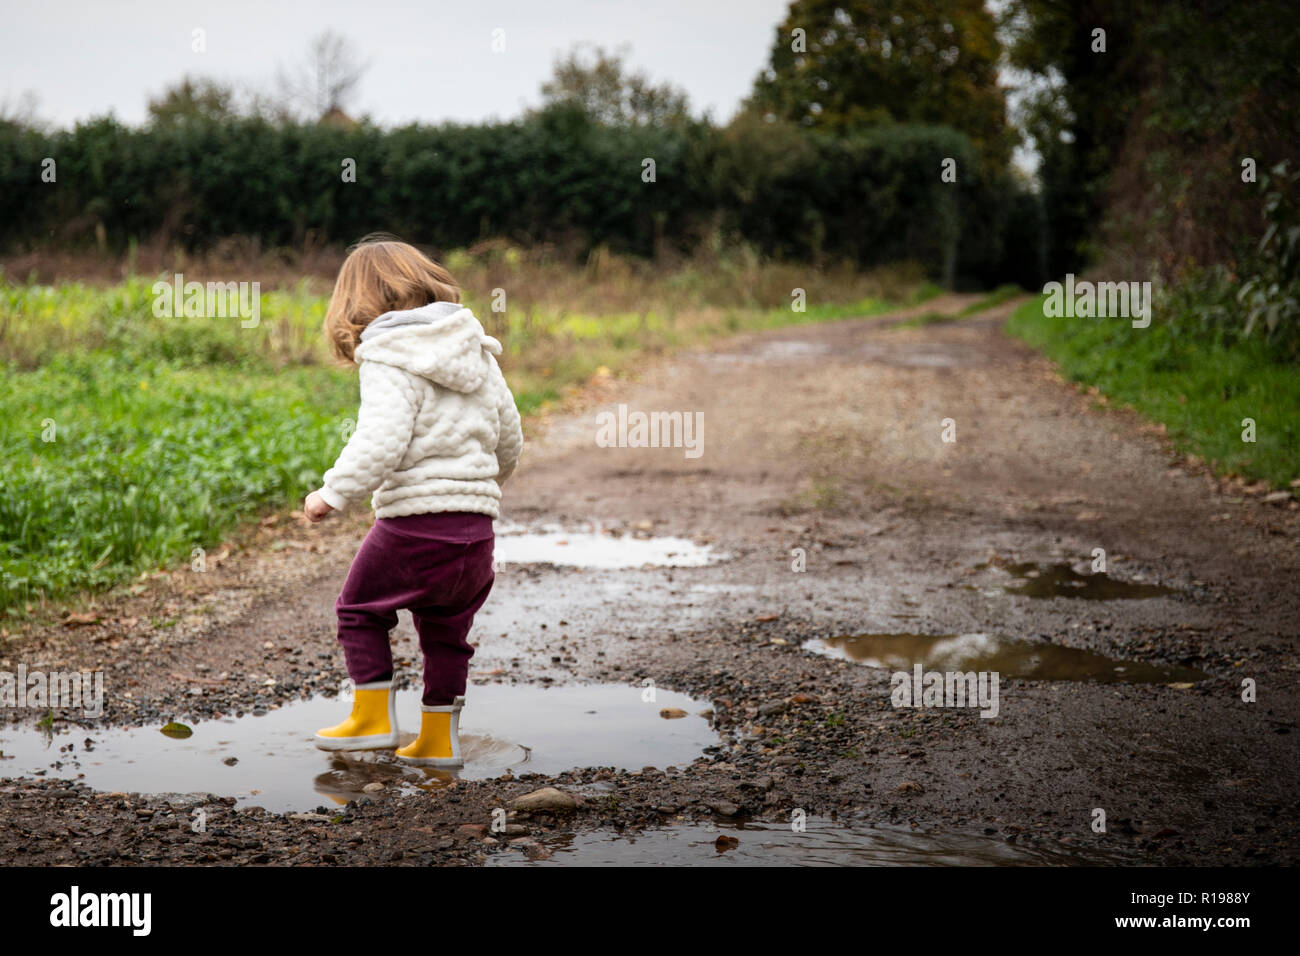 Toddler girl, back view, splashing in puddles in muddy country road with yellow rain boots. Left copy space. Stock Photo